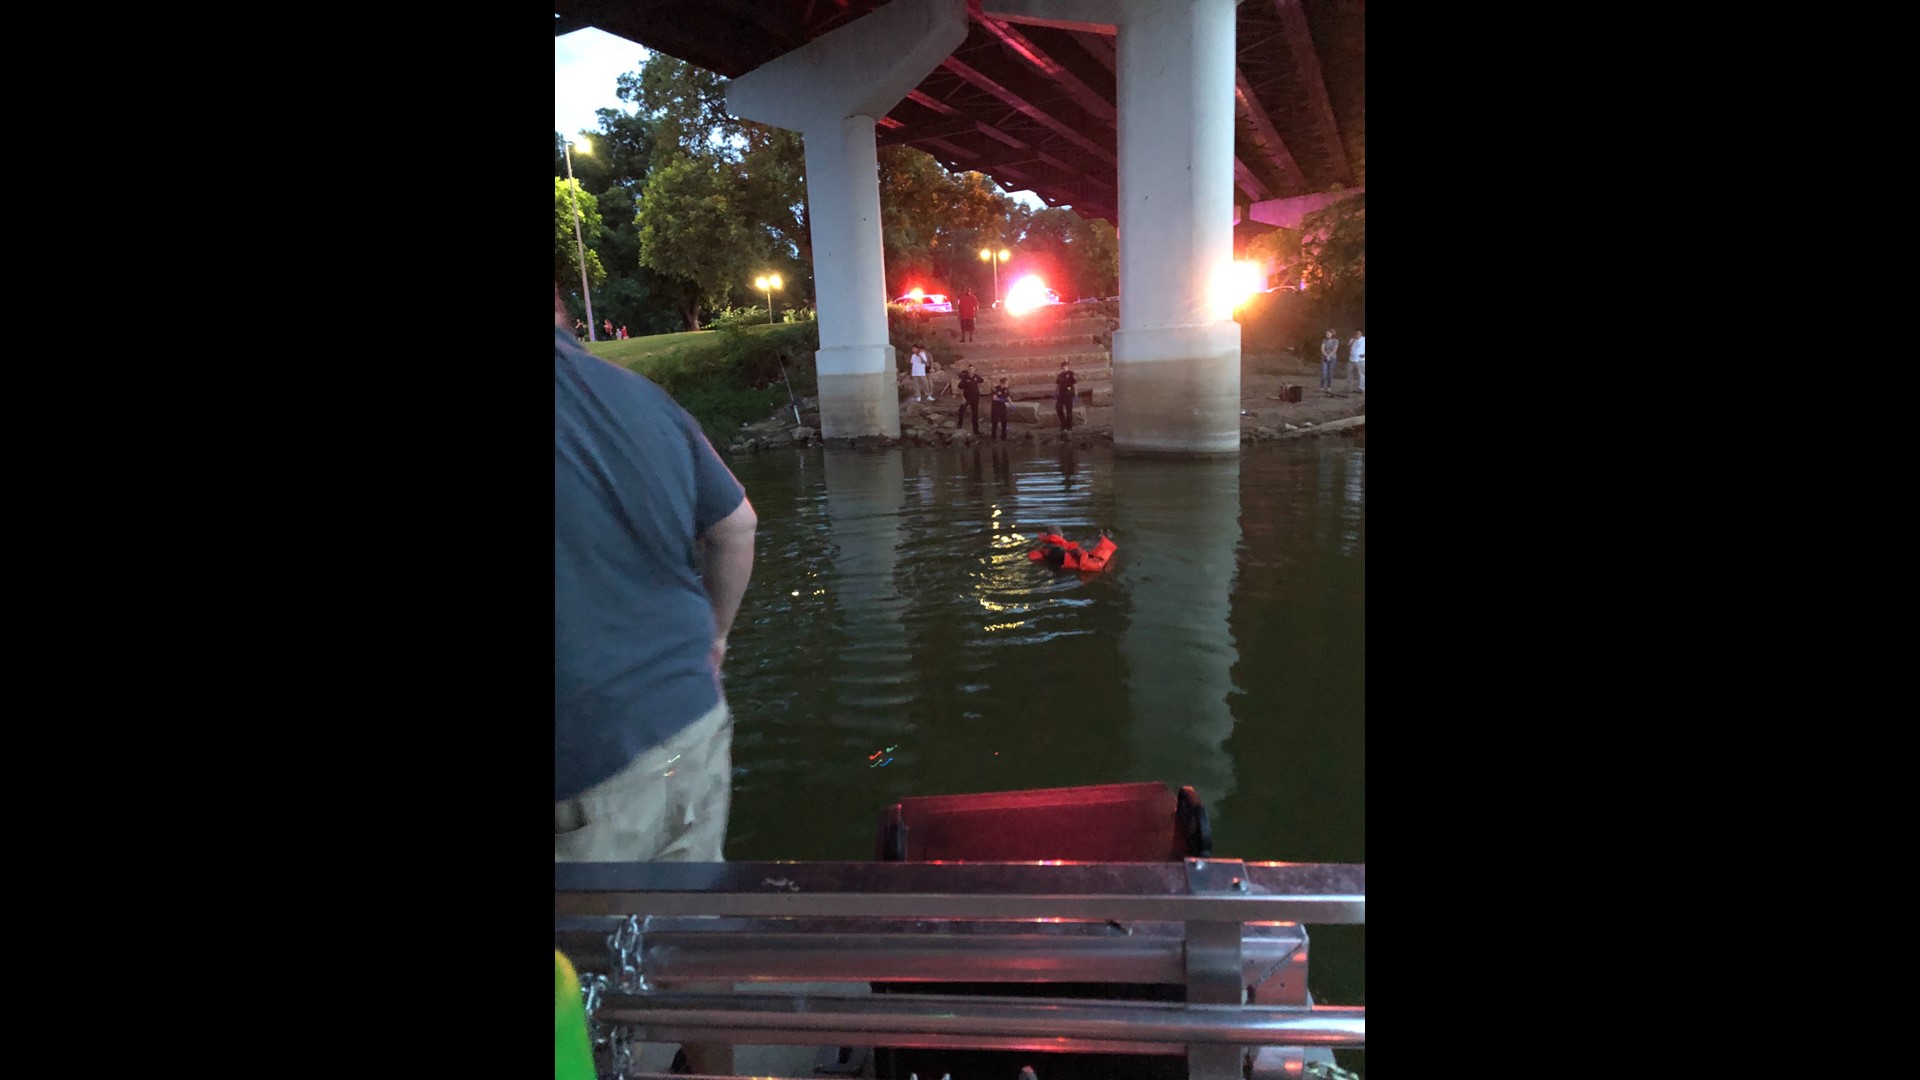 During a dinner cruise Monday night, two Waco River Safari employees sprang into action to save a woman they saw in the water.